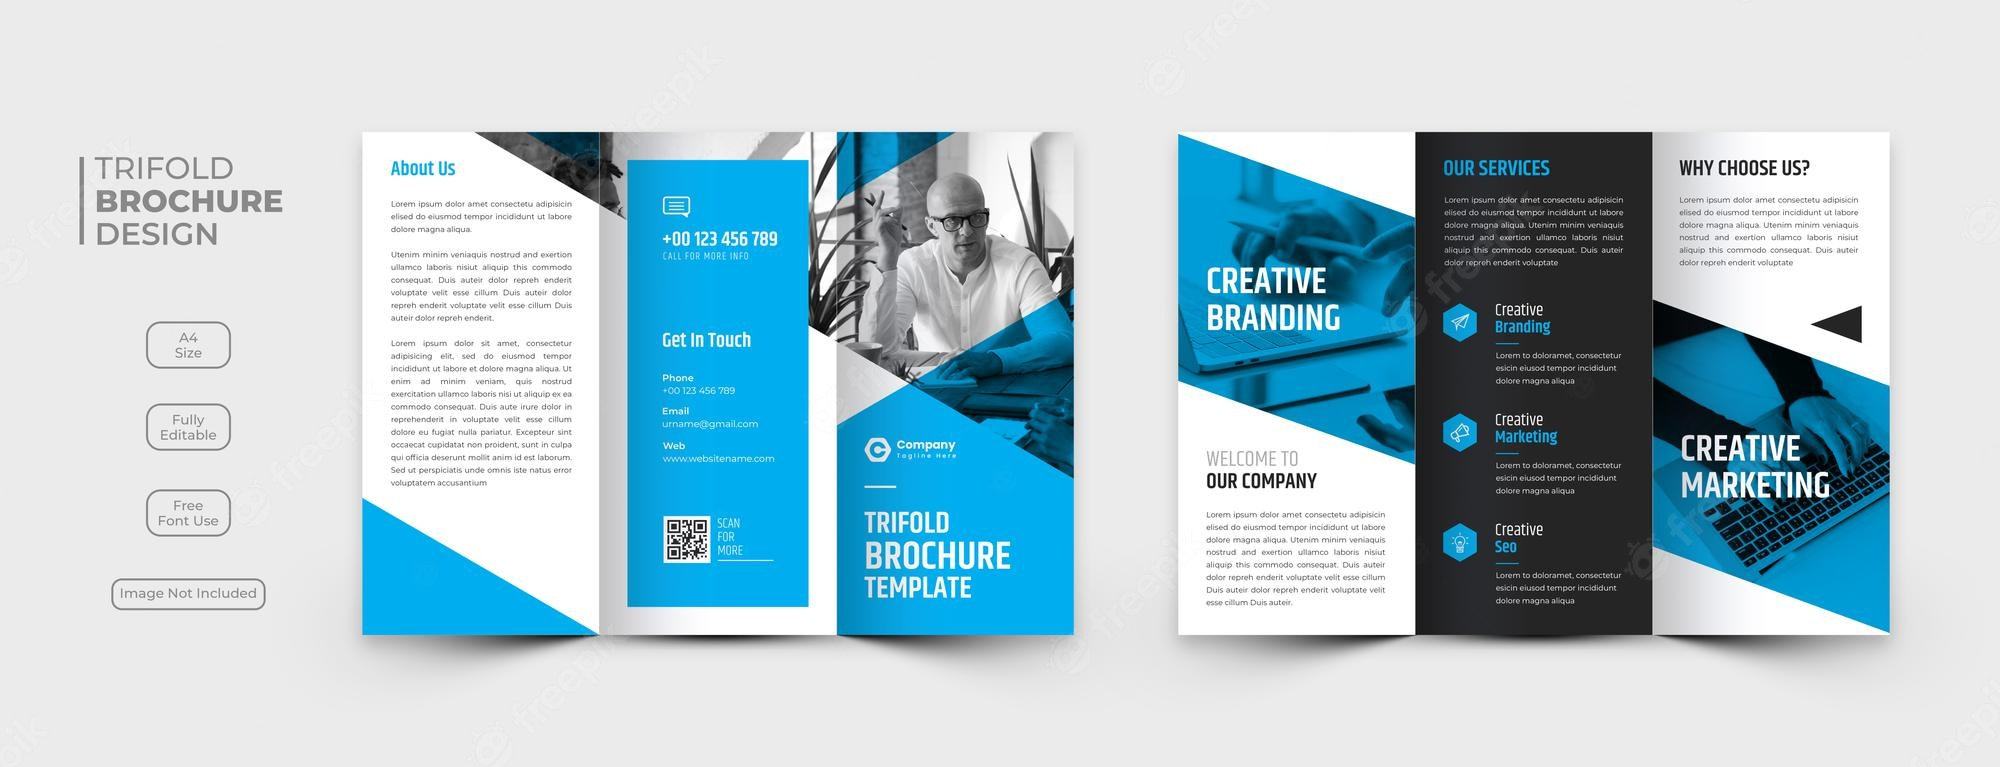 Brochure template - Free Vectors & PSD Download With Online Free Brochure Design Templates